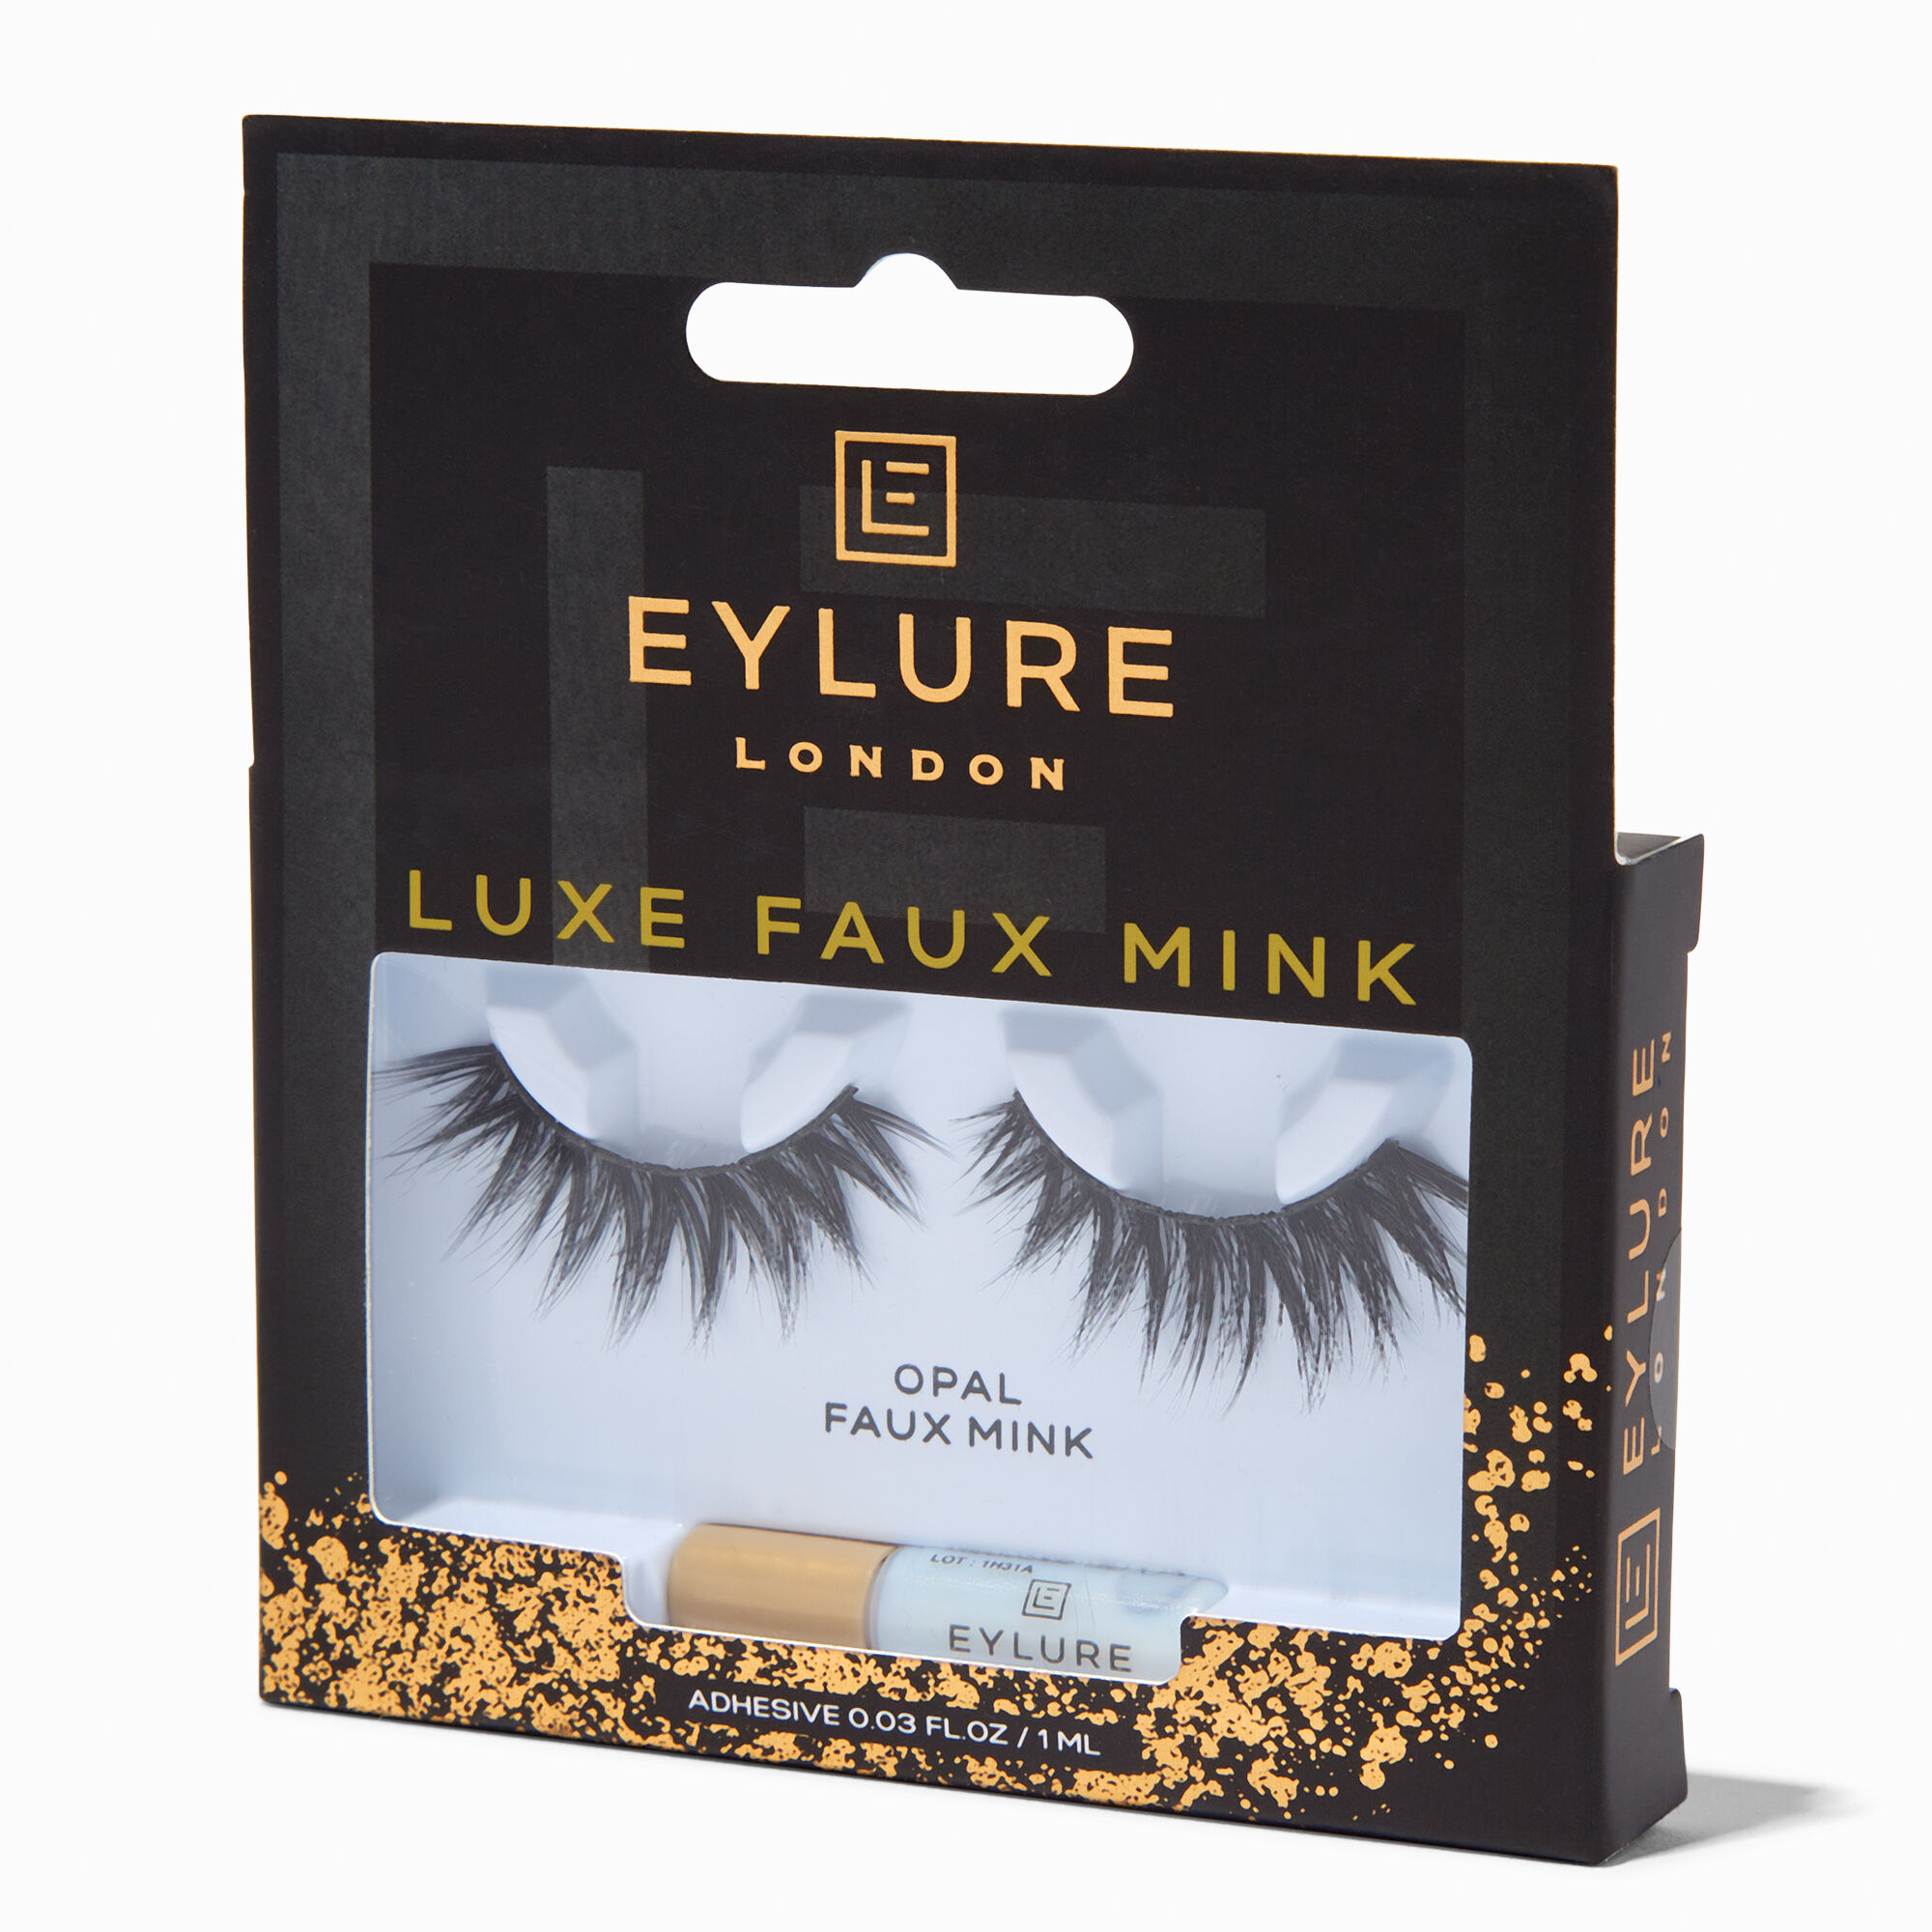 View Claires Eylure Luxe Faux Mink Eyelashes Opal Black information